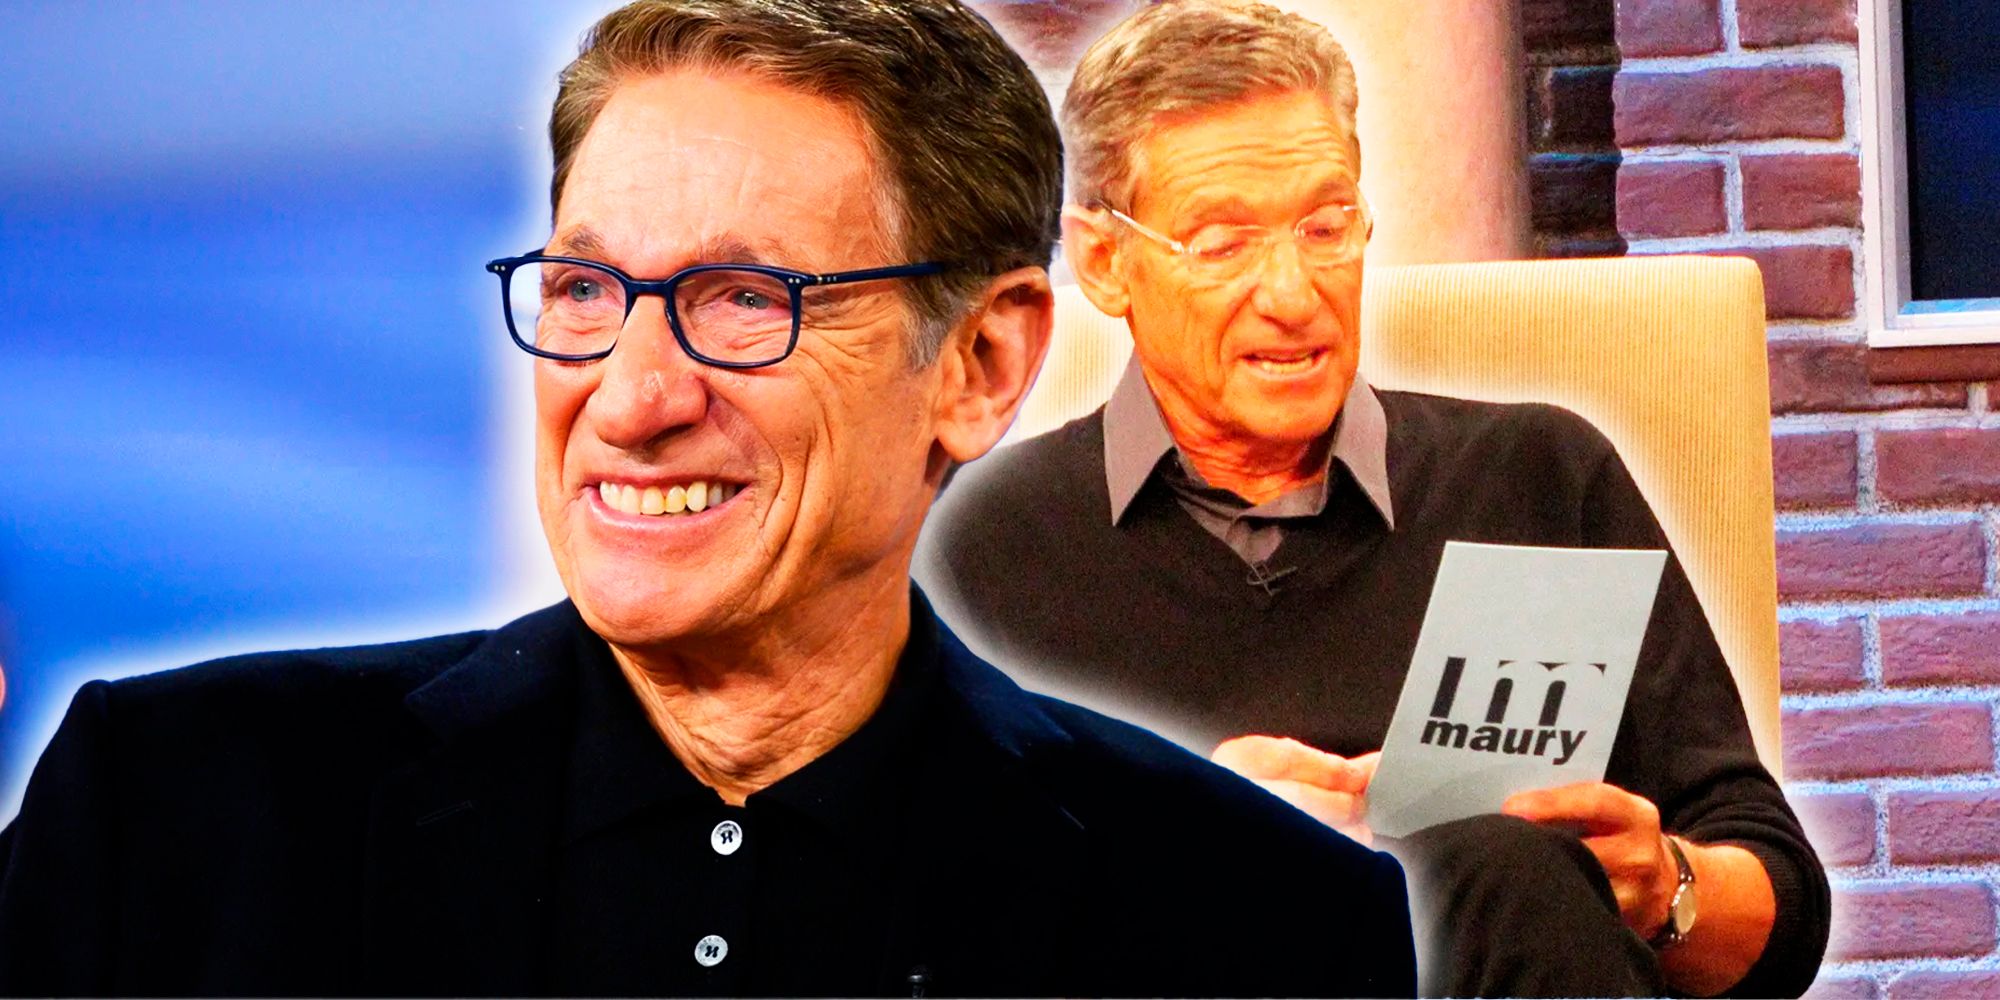 Is The Maury Show Still On? (& Other Fascinating Facts About Series)